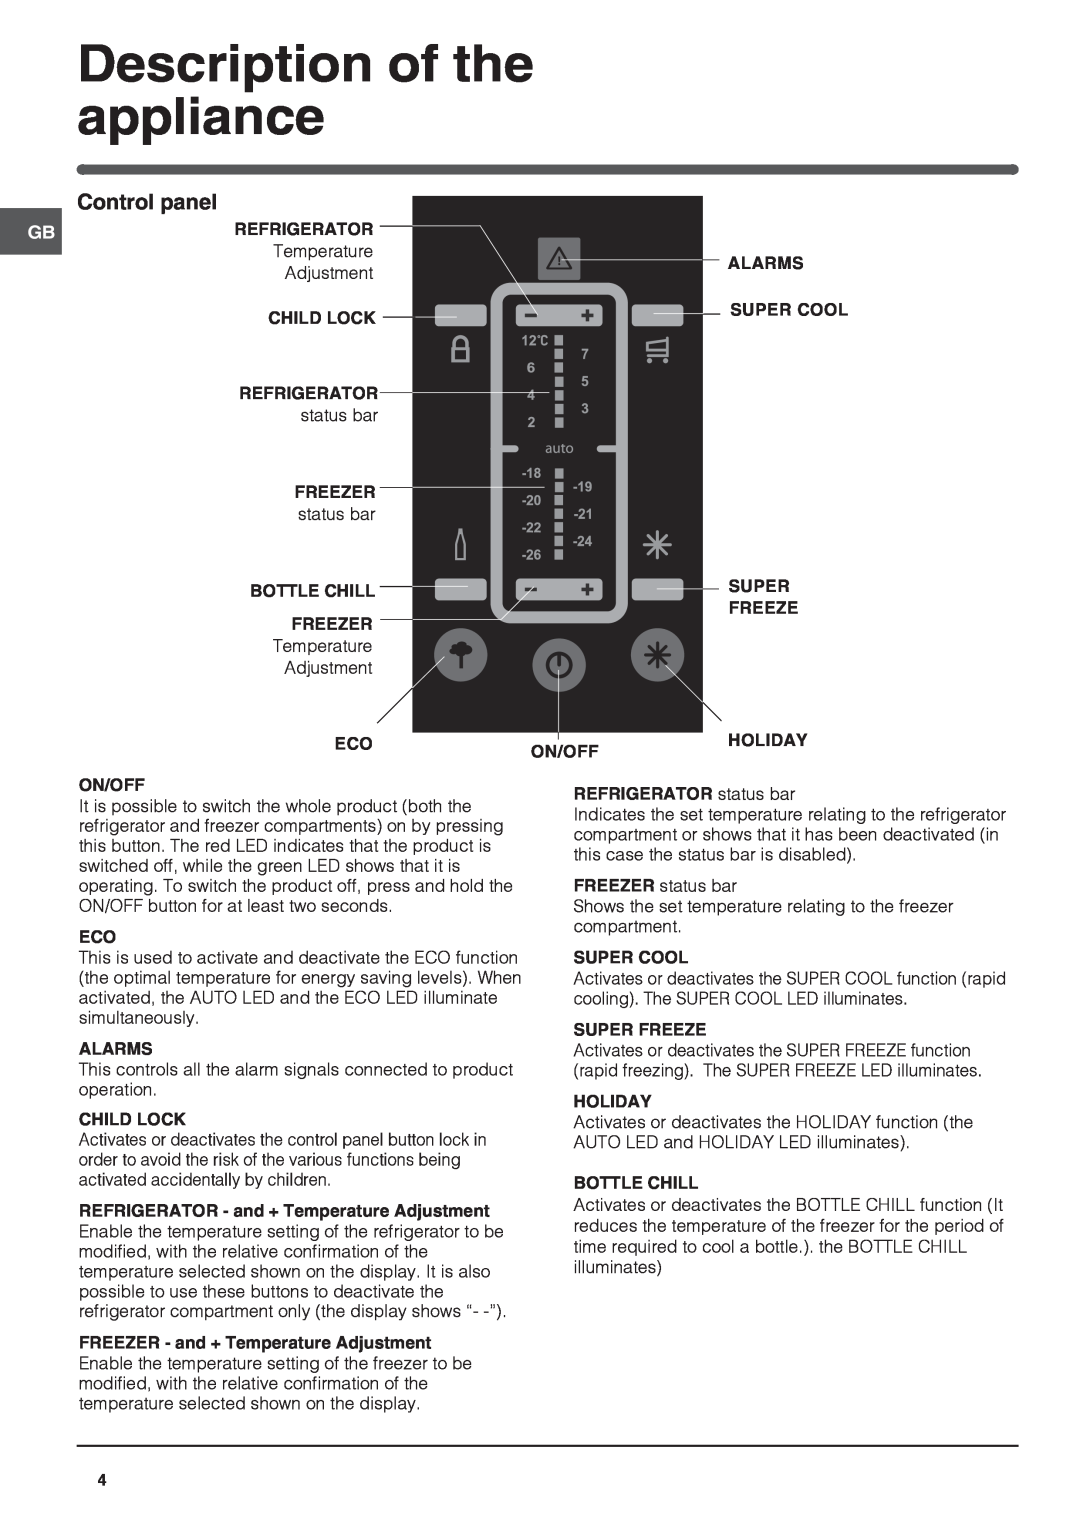 Indesit Refrigerator manual Description of the appliance, Control panel 